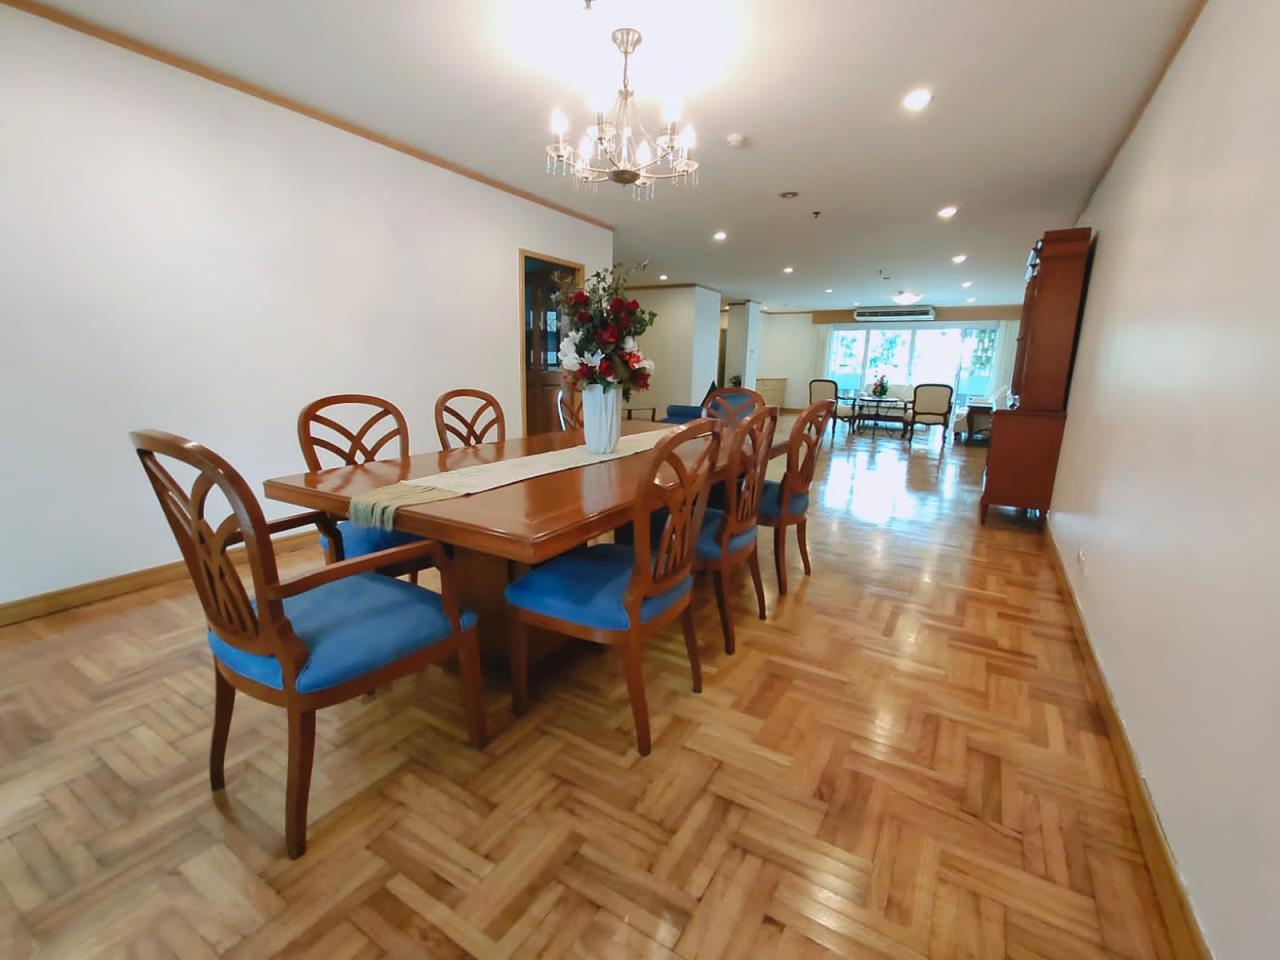 3 Bedrooms, 3 Bathrooms 315sqm size GM Residence For Rent 90,000 THB